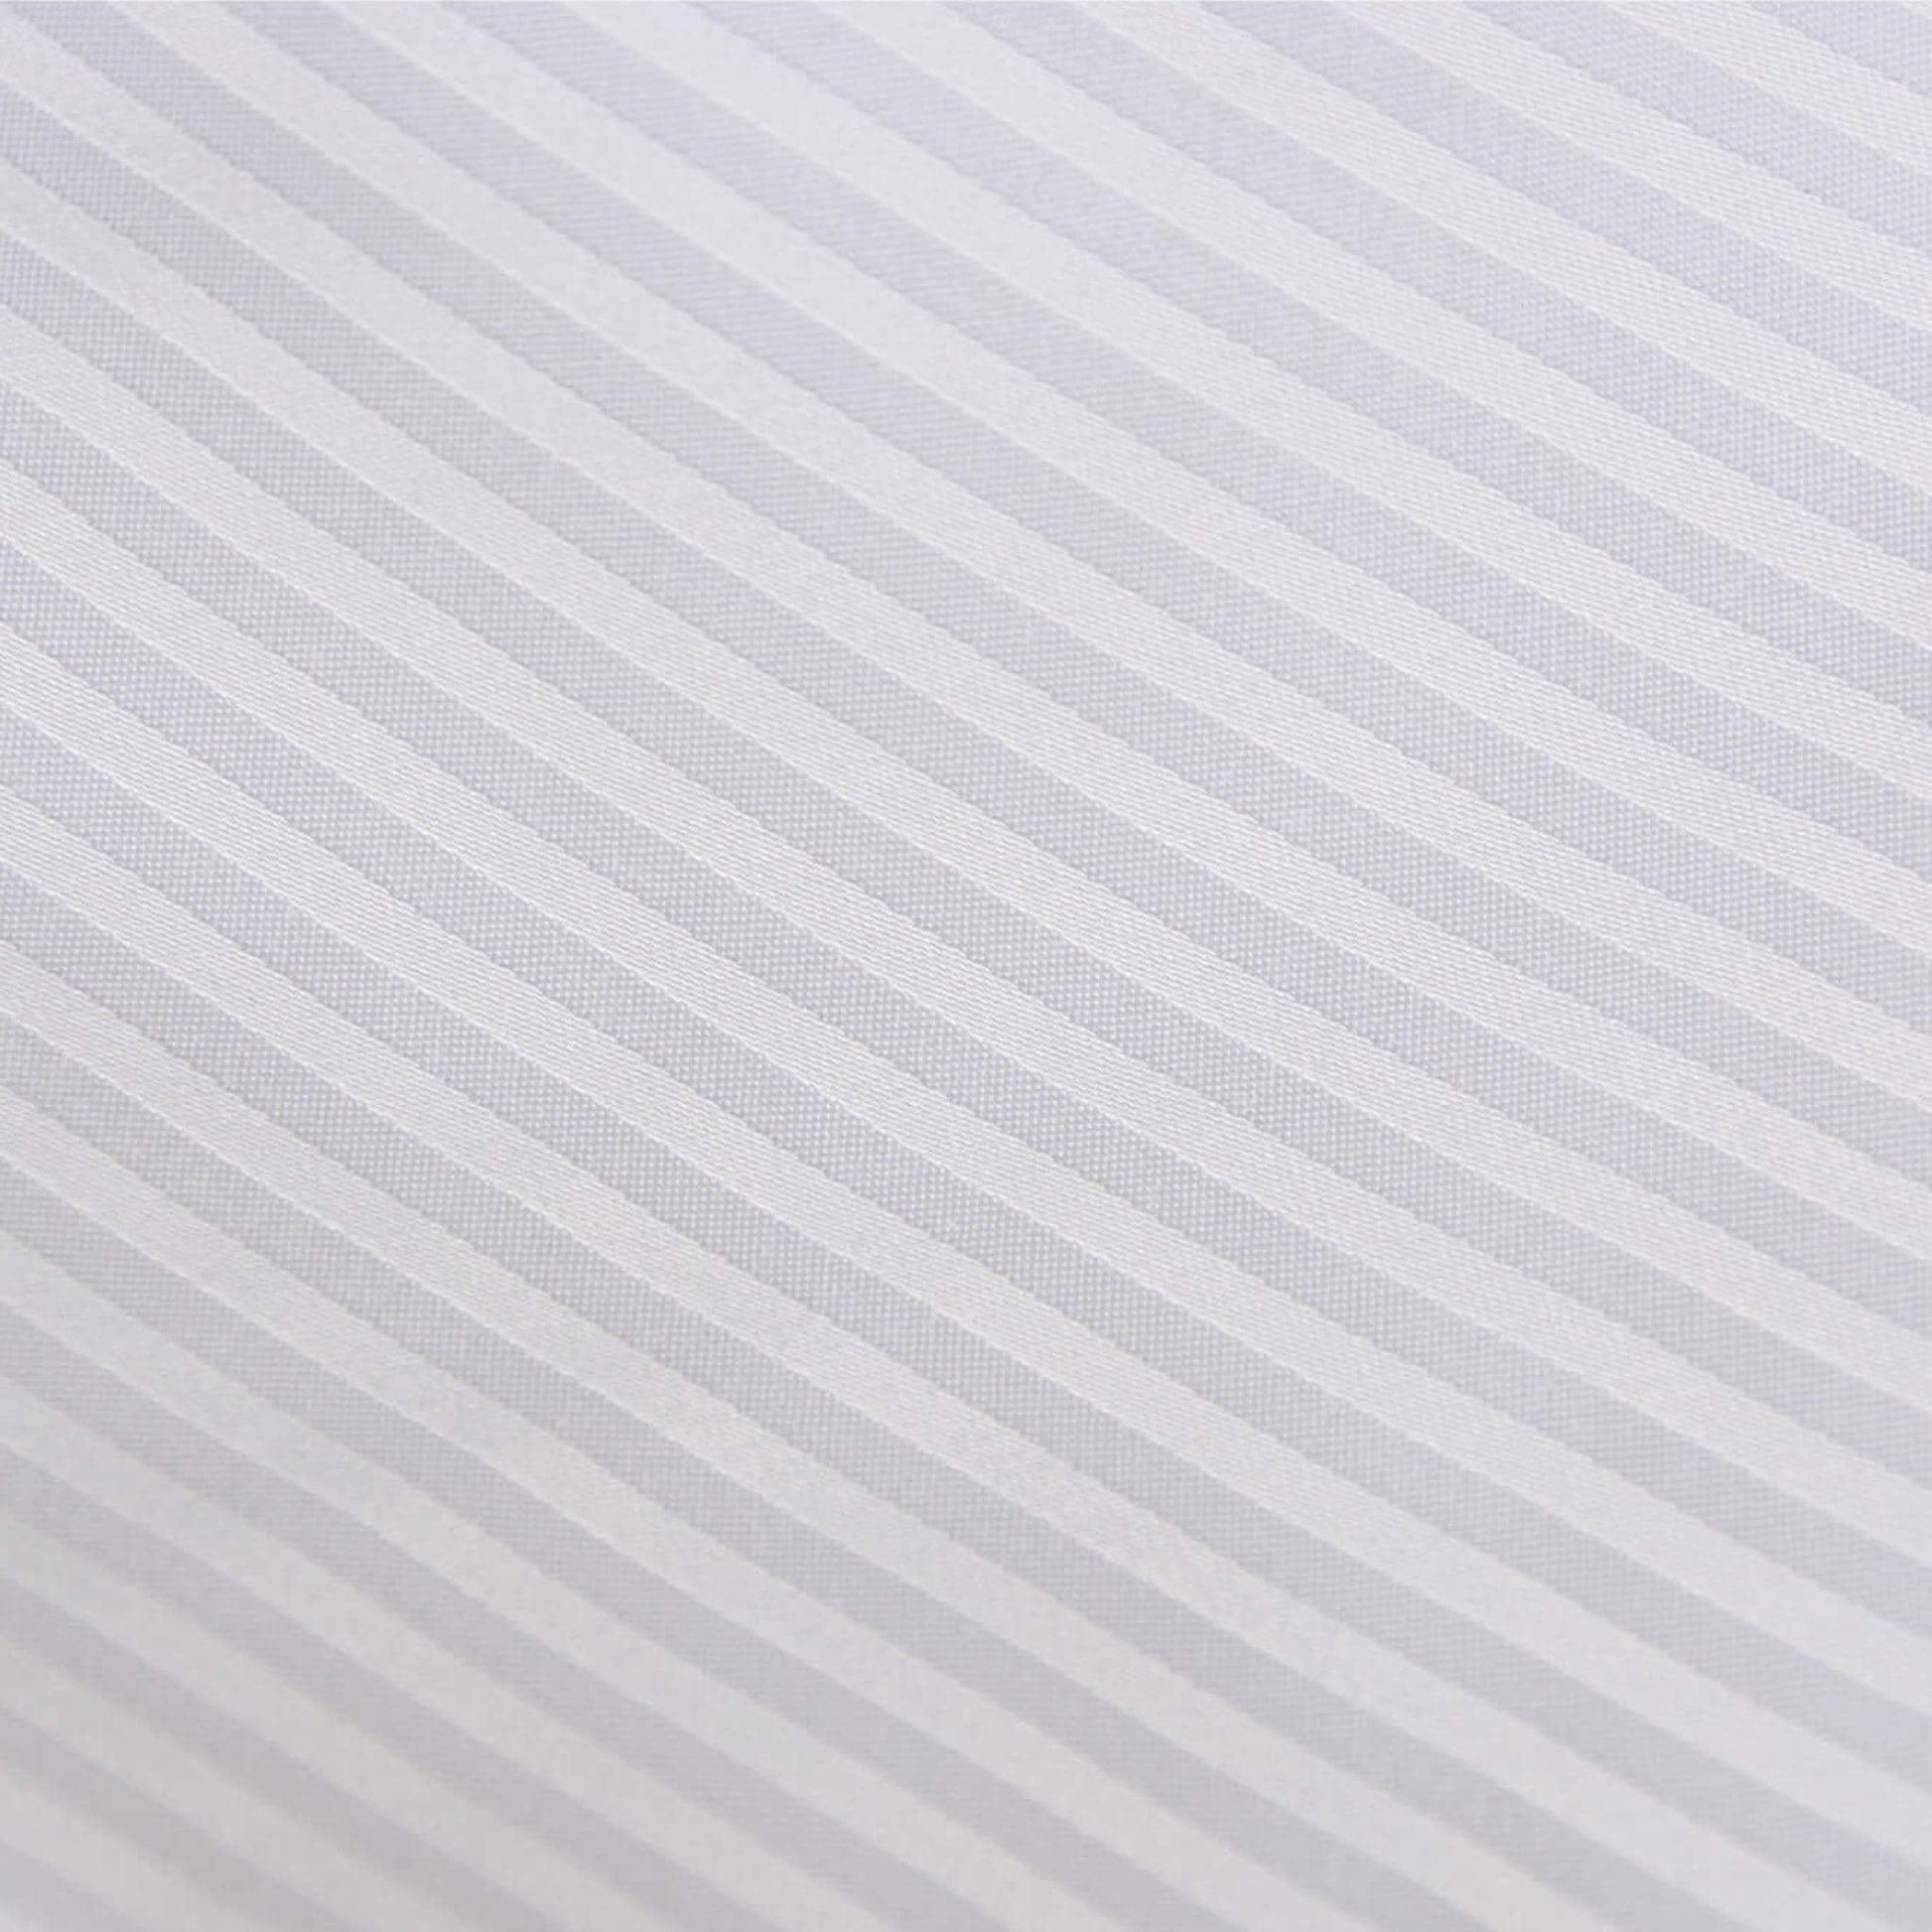 Infinity Striped Top Sheet: Modern 5mm pattern, breathable & hypoallergenic, elevating your sleep experience.